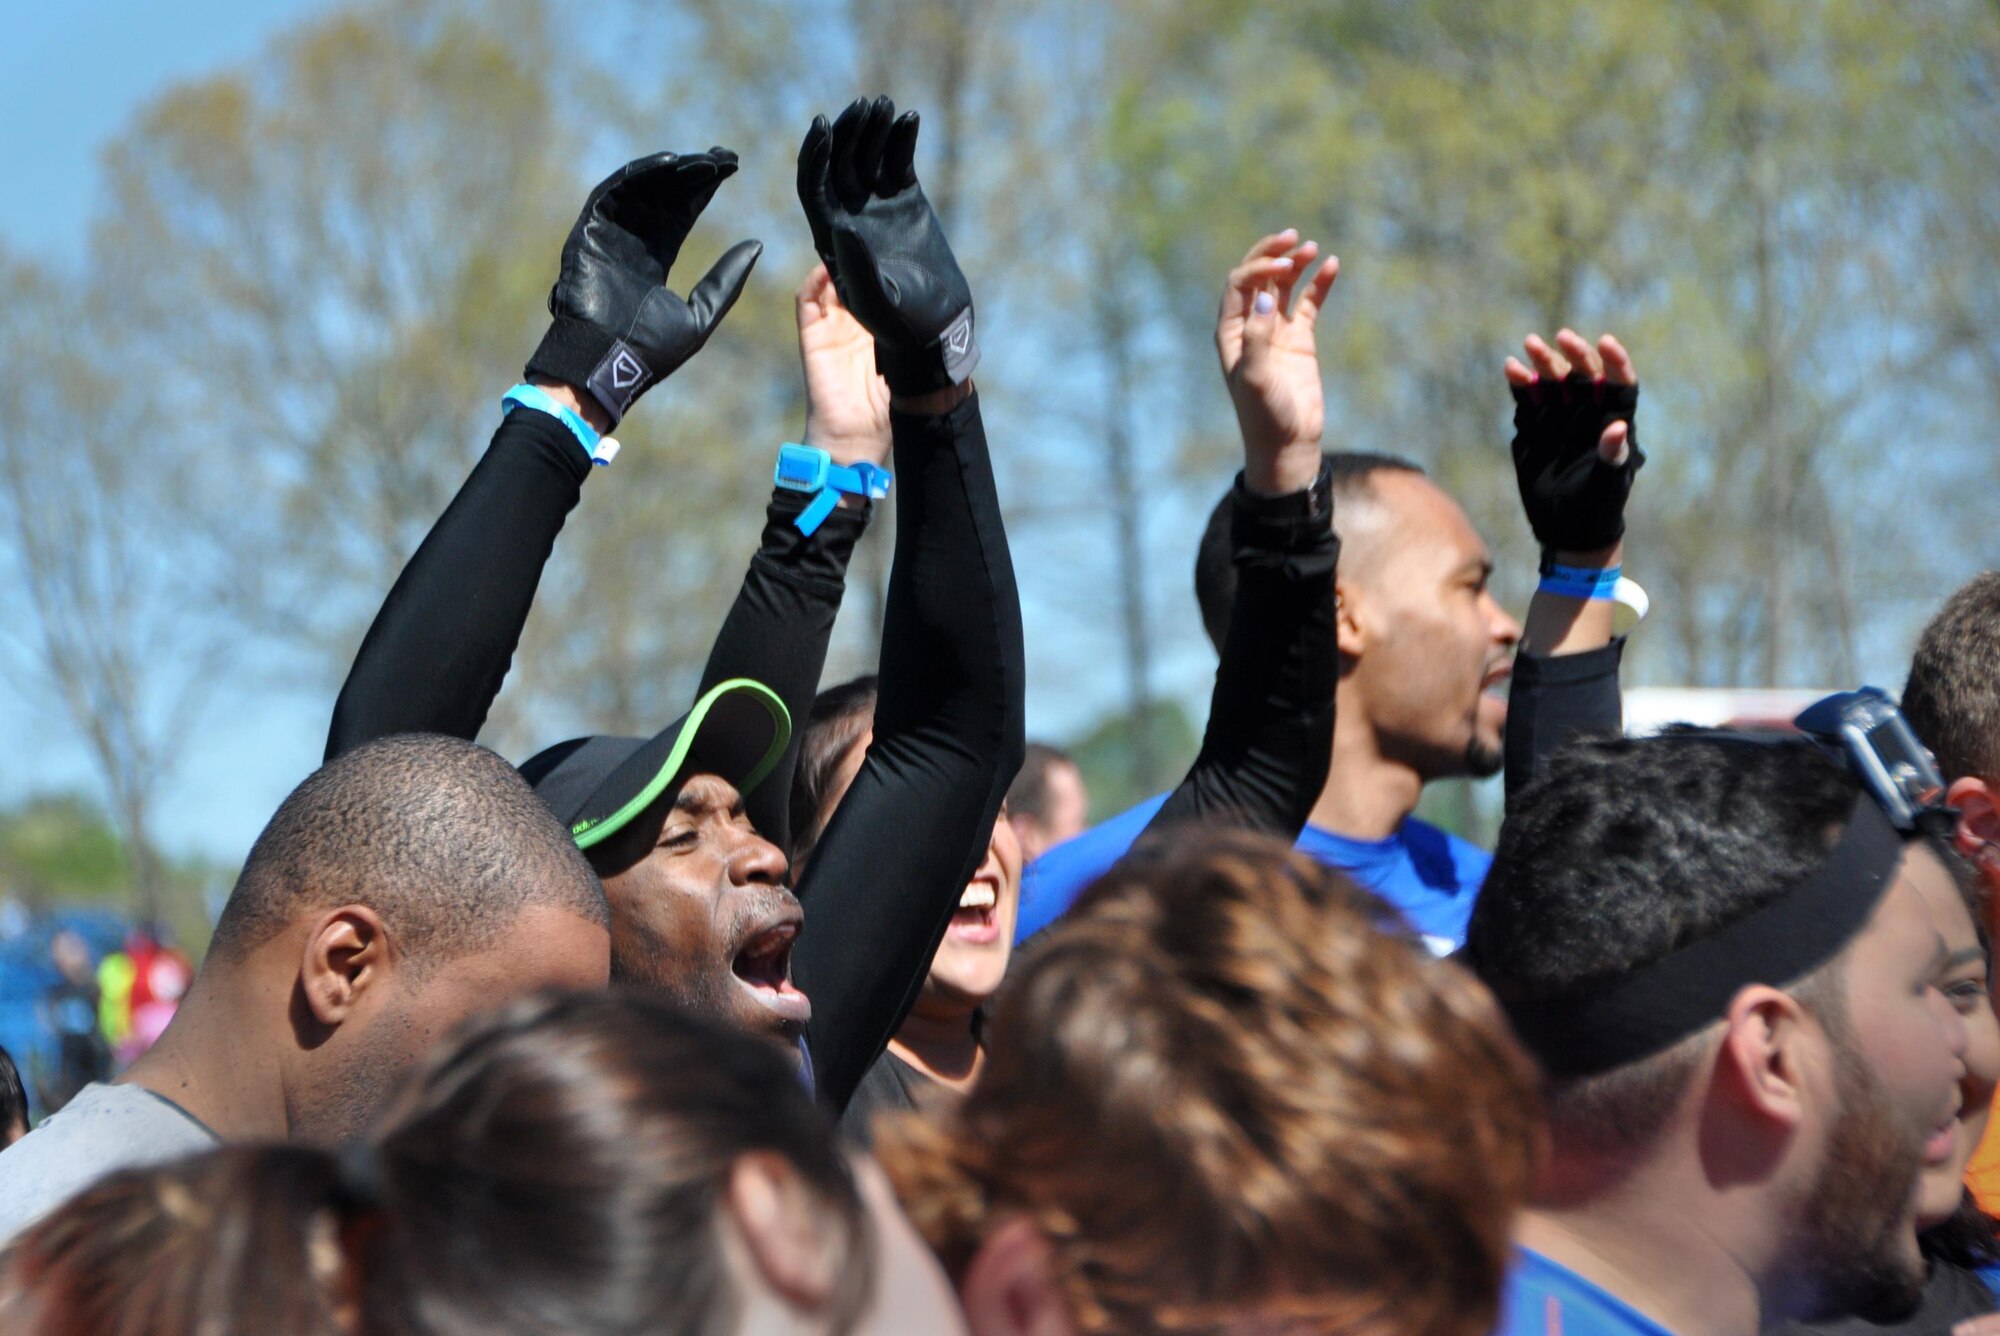 Senior Master Sgt. Eric Jones, 94th Logistics Readiness Squadron, and Capt. Natalie Campos, 22nd Air Force executive officer, show their excitement at the starting line of the Savage Race on April 9, 2016 in Dallas, Georgia. The Savage Race is an obstacle course and running trail that was created to push people to their physical limit and encourage teamwork. (U.S. Air Force photo by Senior Airman Lauren Douglas)